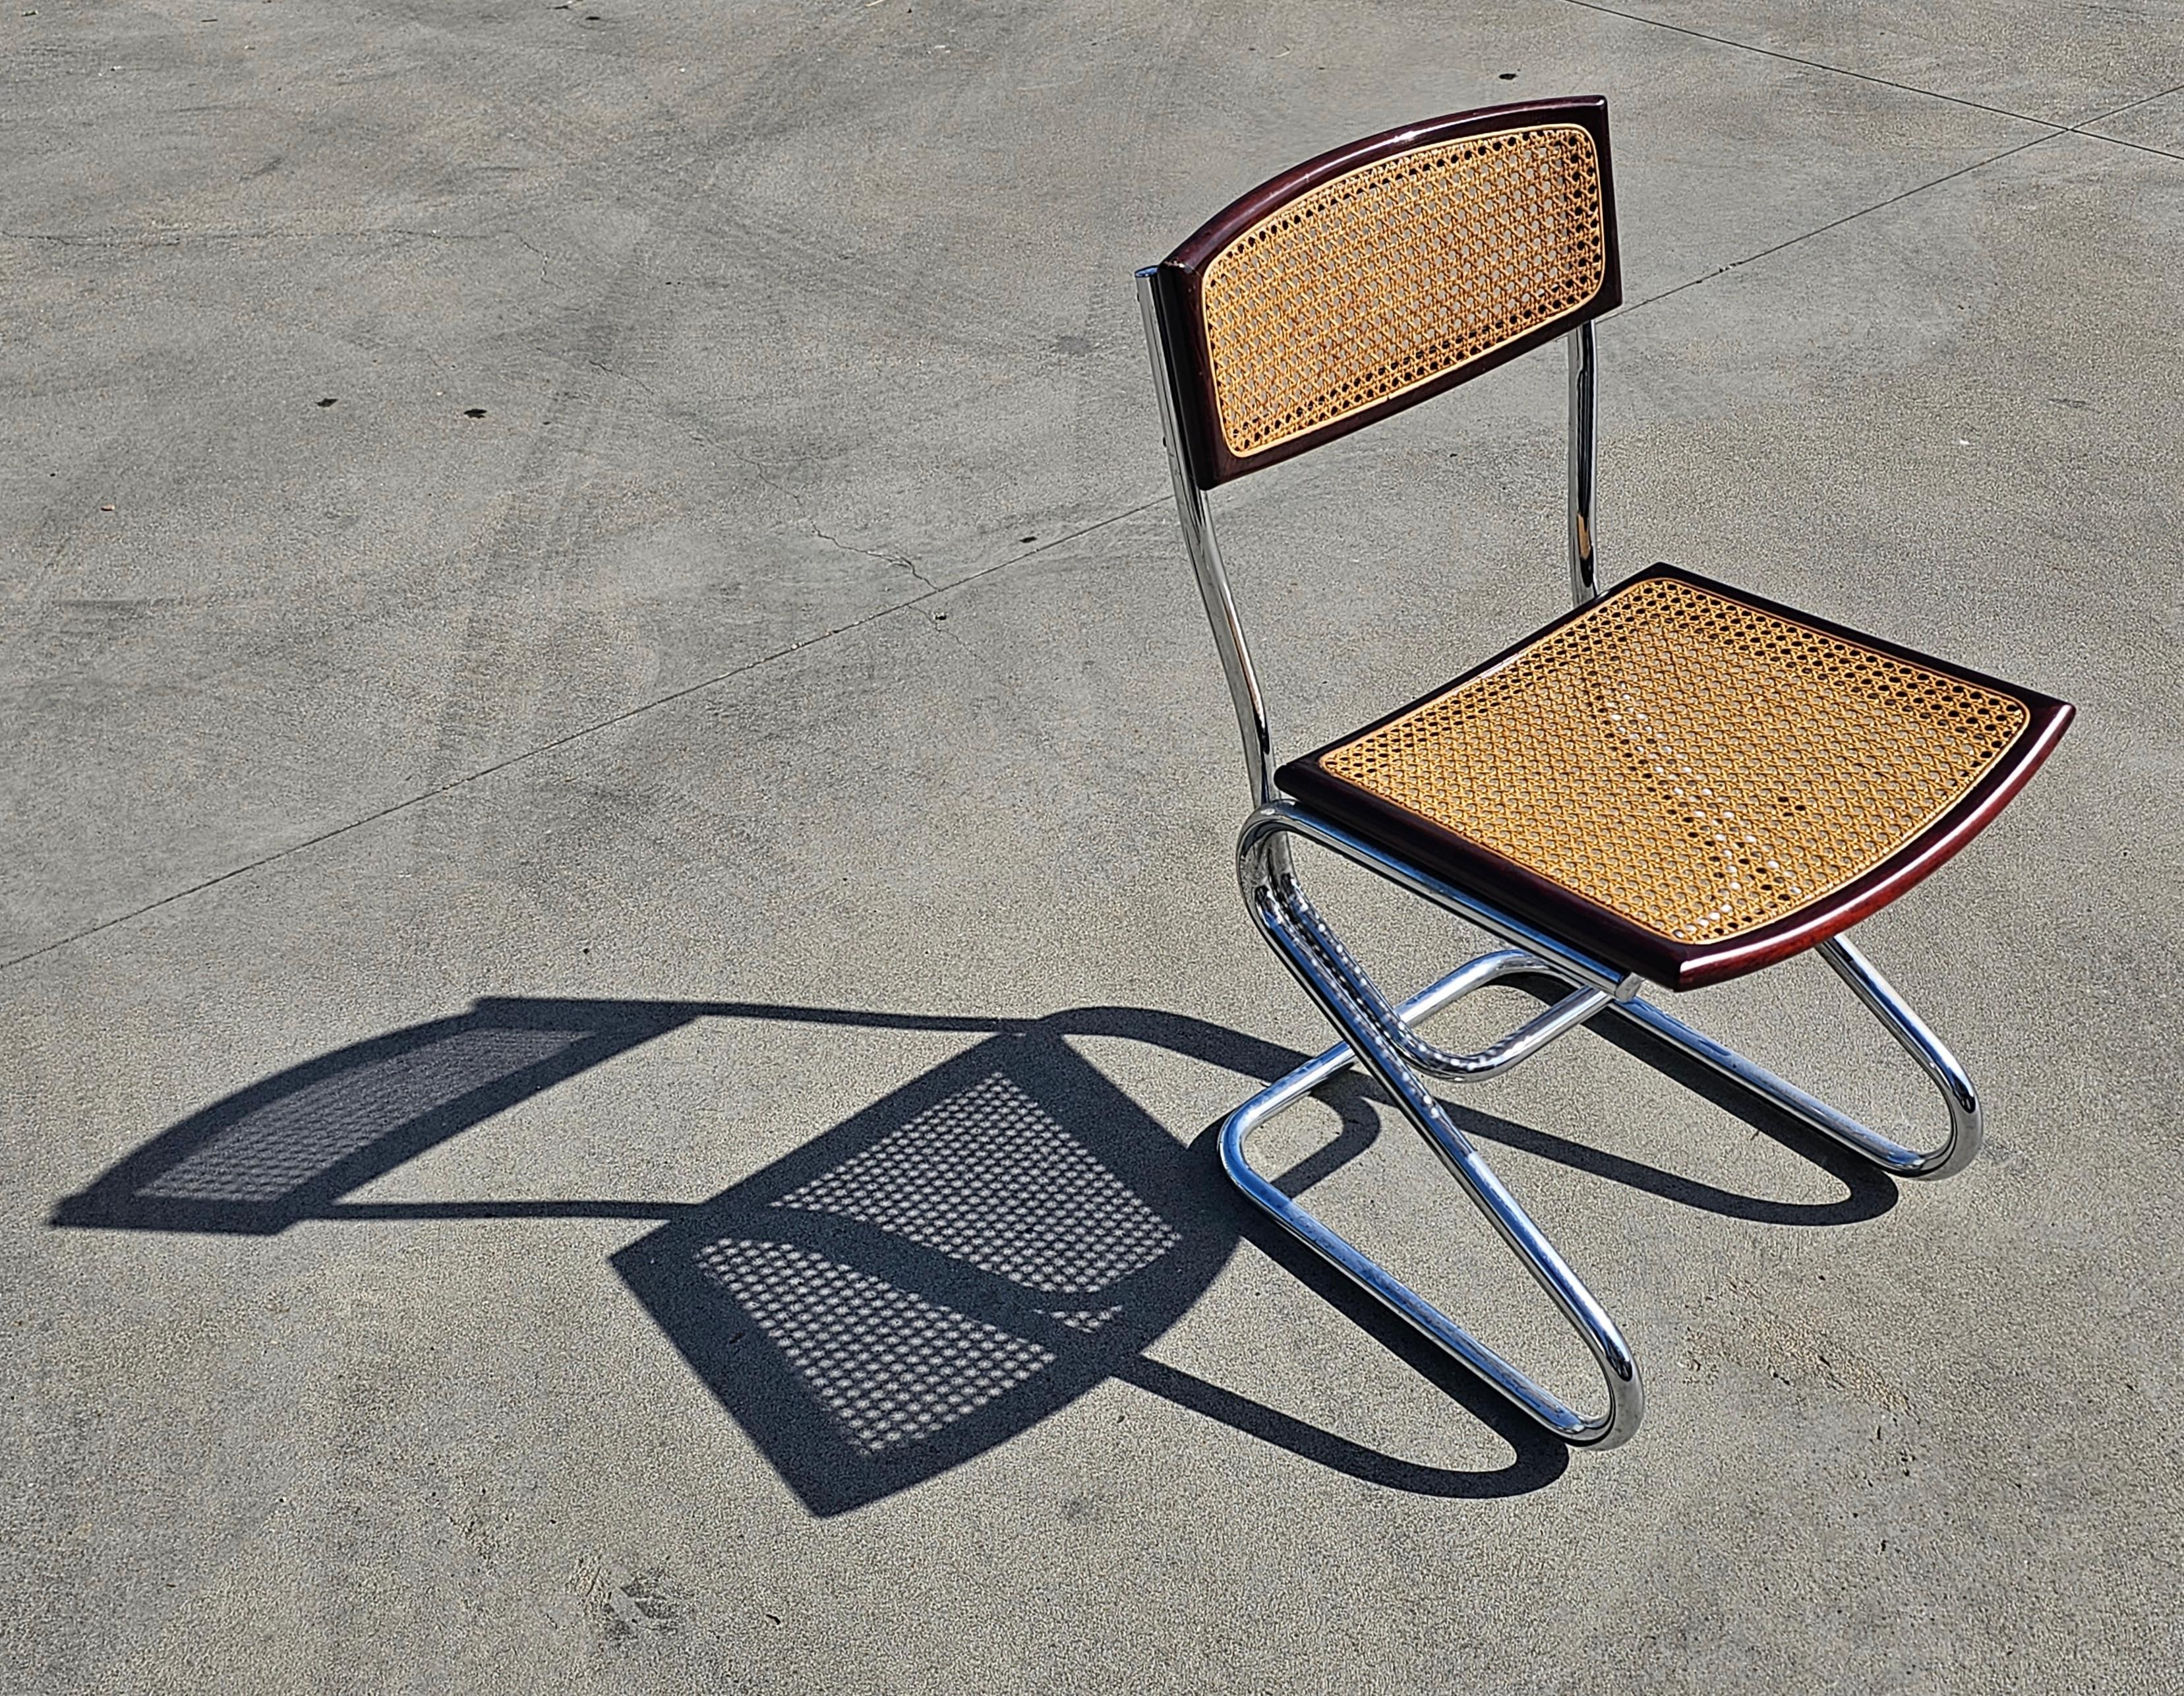 In this listing you will find Bauhaus inspired dining chairs done in style of Cesca chairs designed by Marcel Breuer. They feature tubular frames with seats and backrests done in beech wood and cane. The cane on the seats was recently replaced. Very